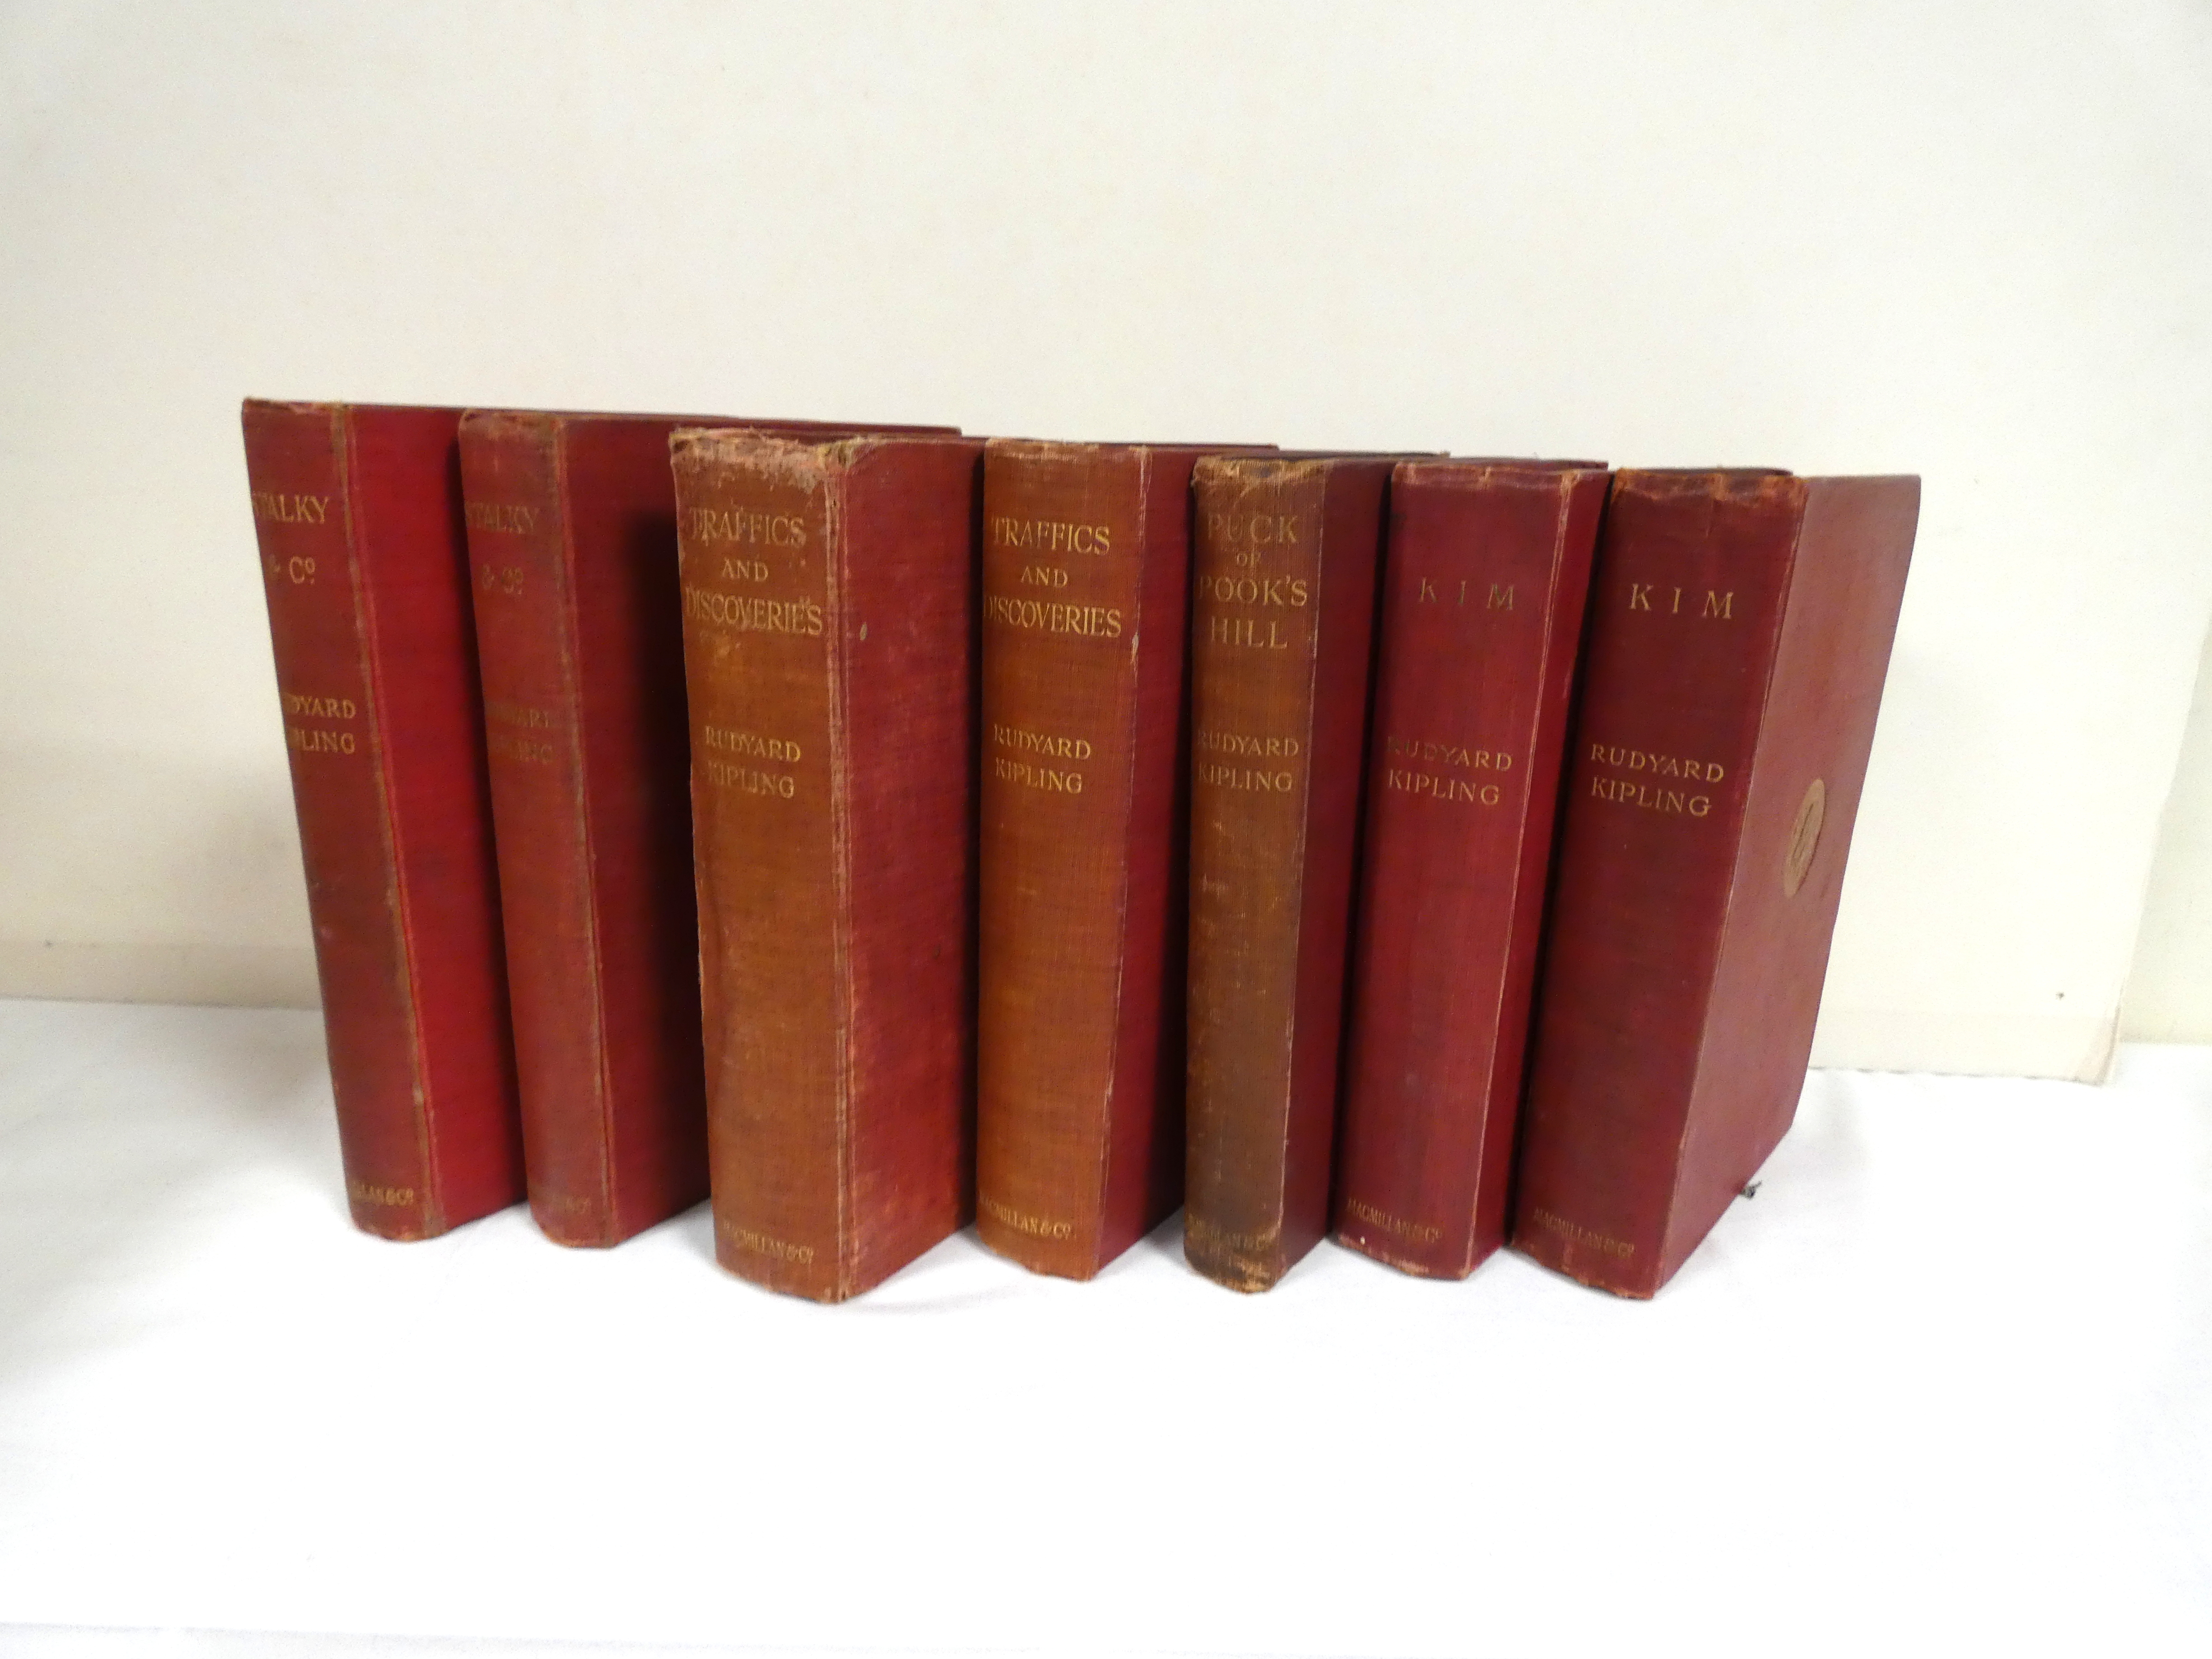 KIPLING RUDYARD.  18 various vols., mainly 1sts incl. 1st eds. of Kim (x 2), Stalky & Co. (x 2), - Image 3 of 4